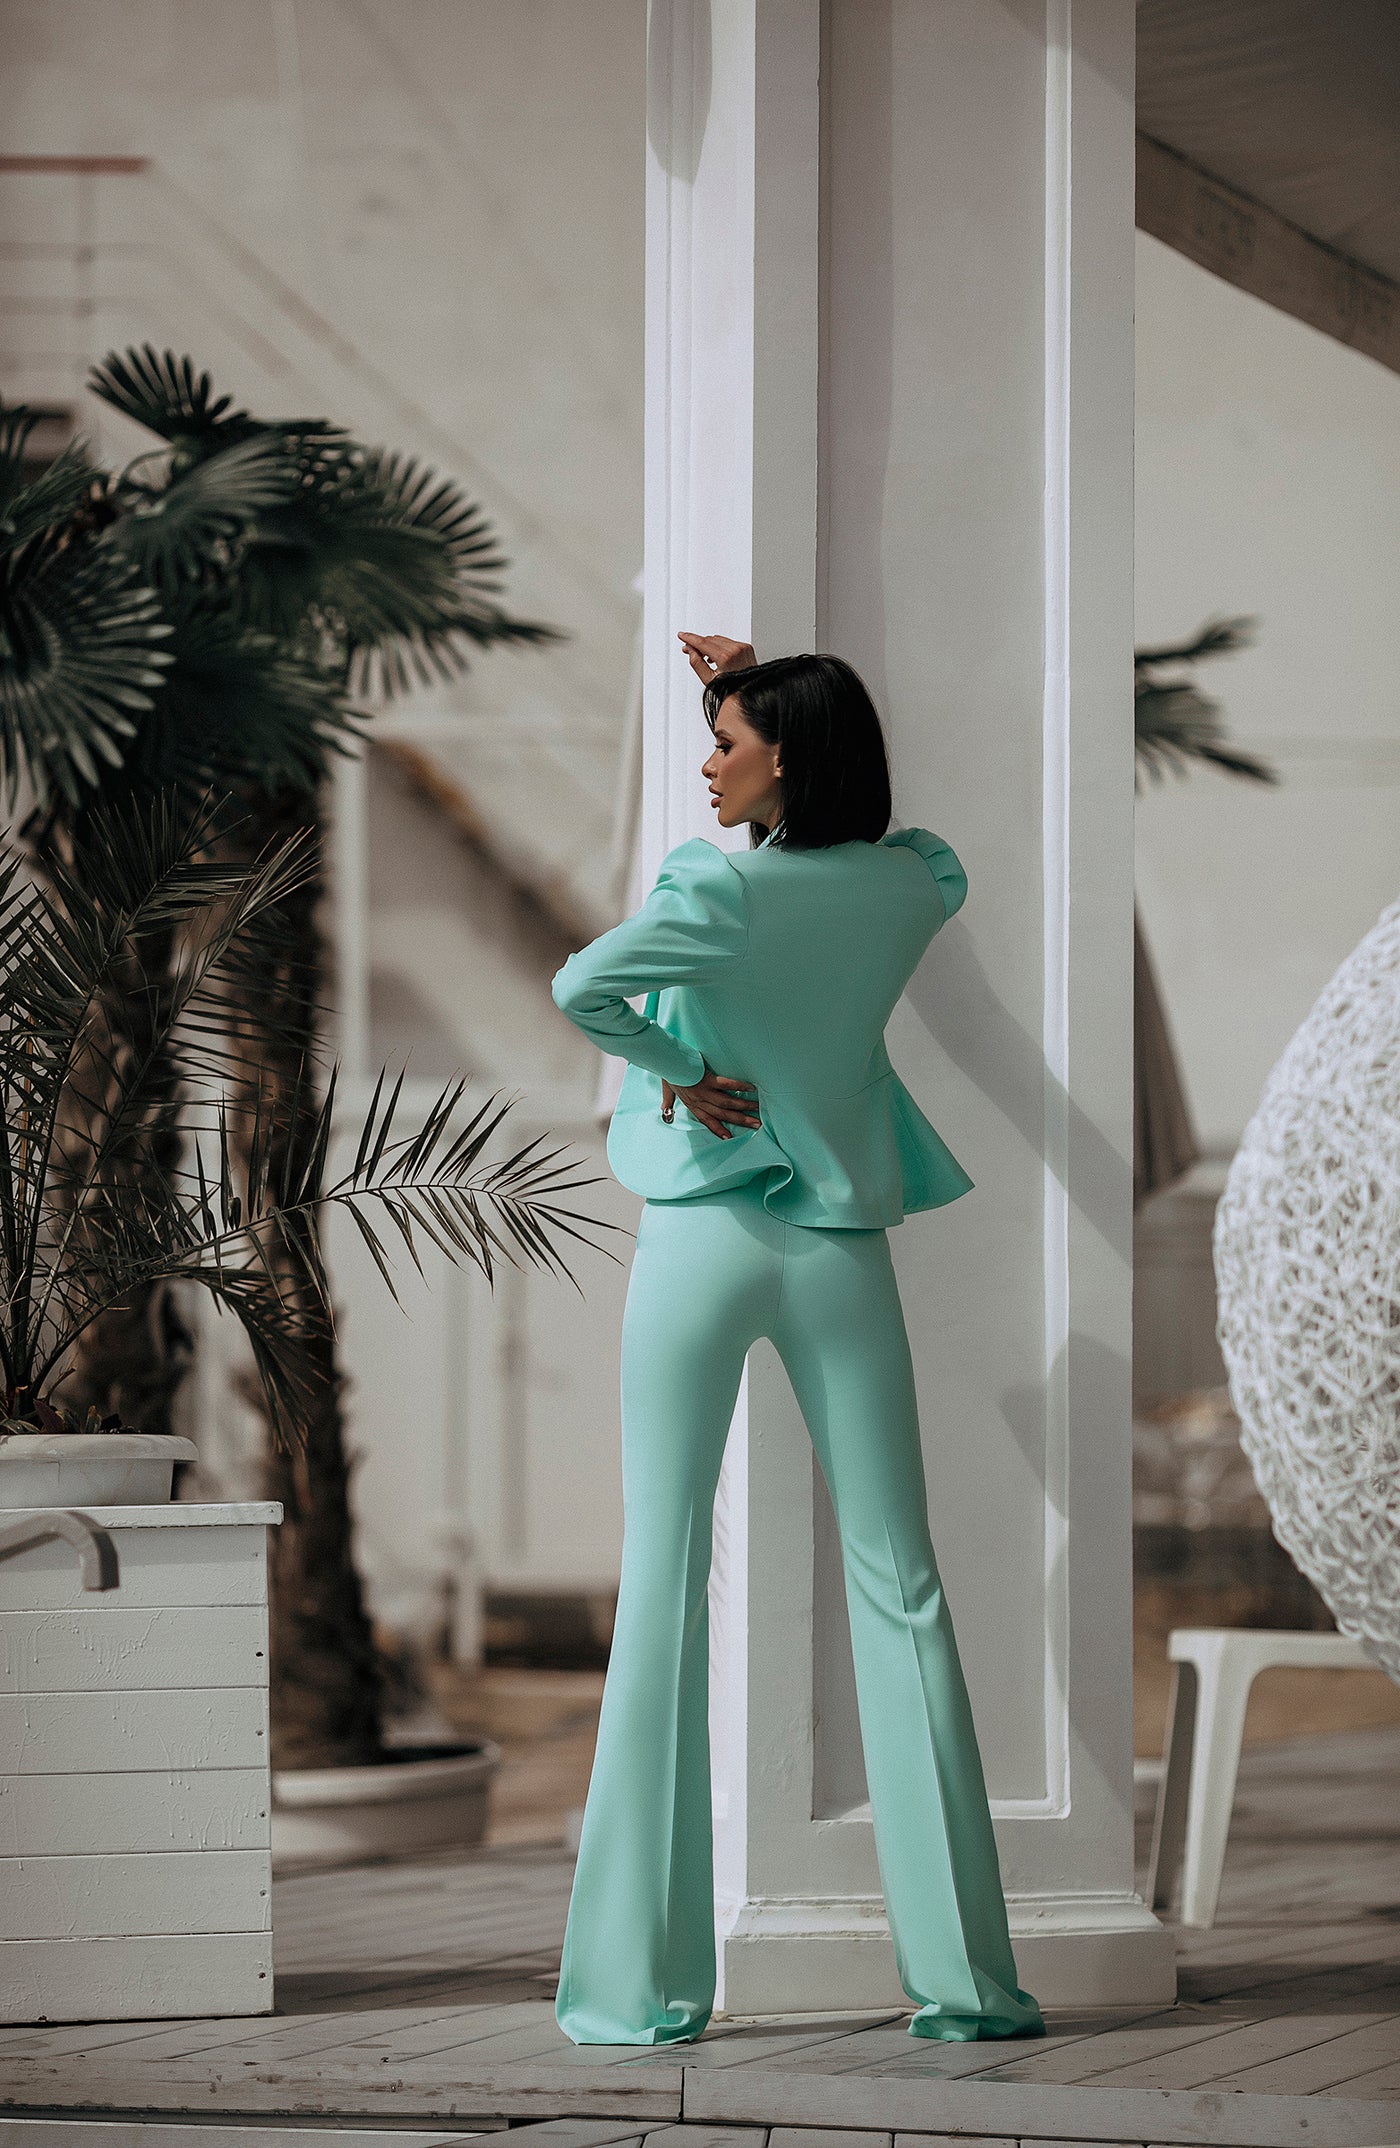 Tiffany-Blue Double Breasted Suit 2-Piece (article C333)